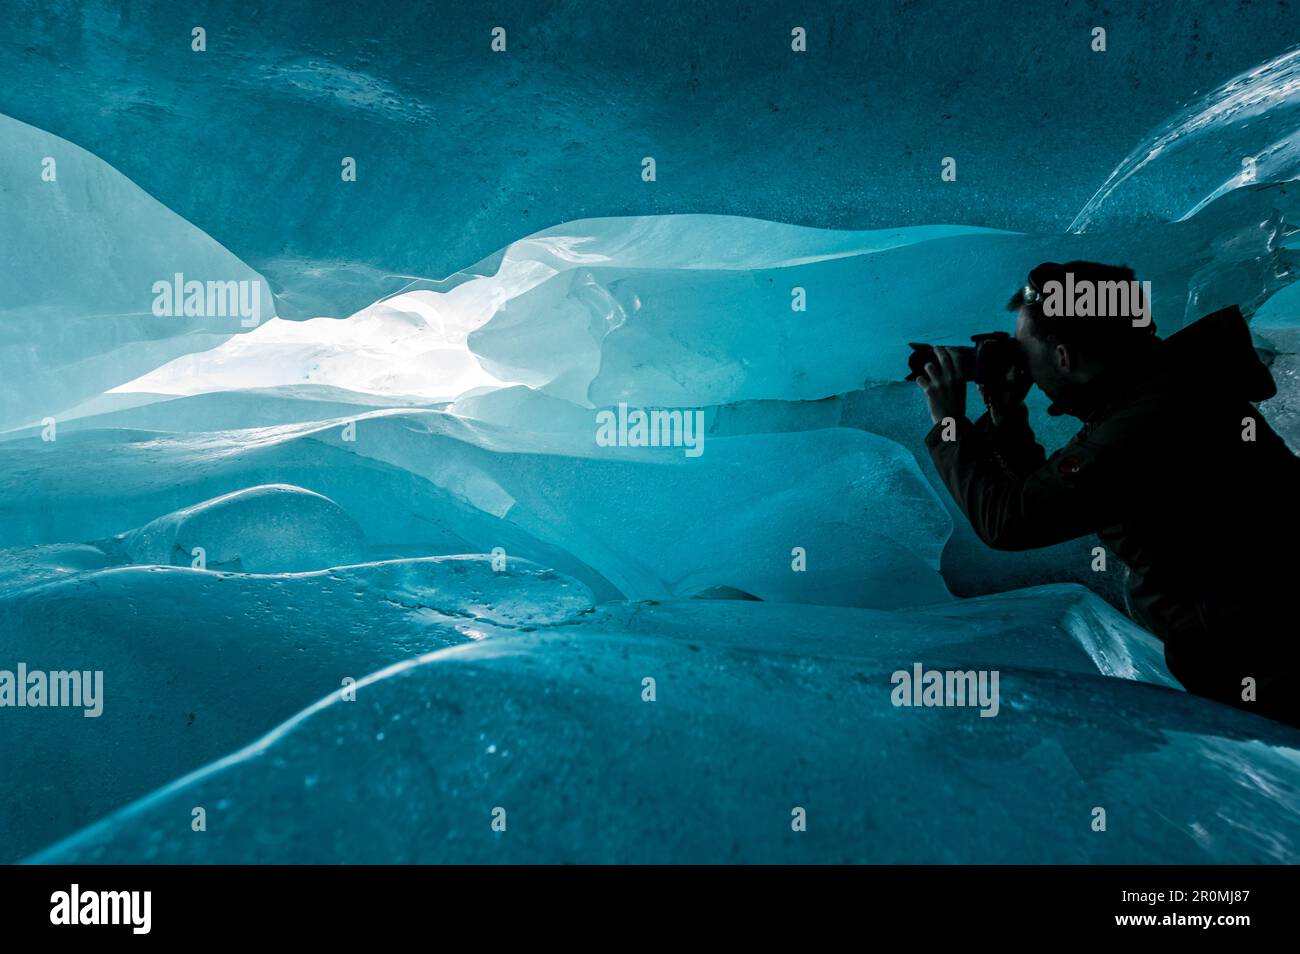 Adventure Photographer in blue ice cave in the Swiss Alps Stock Photo